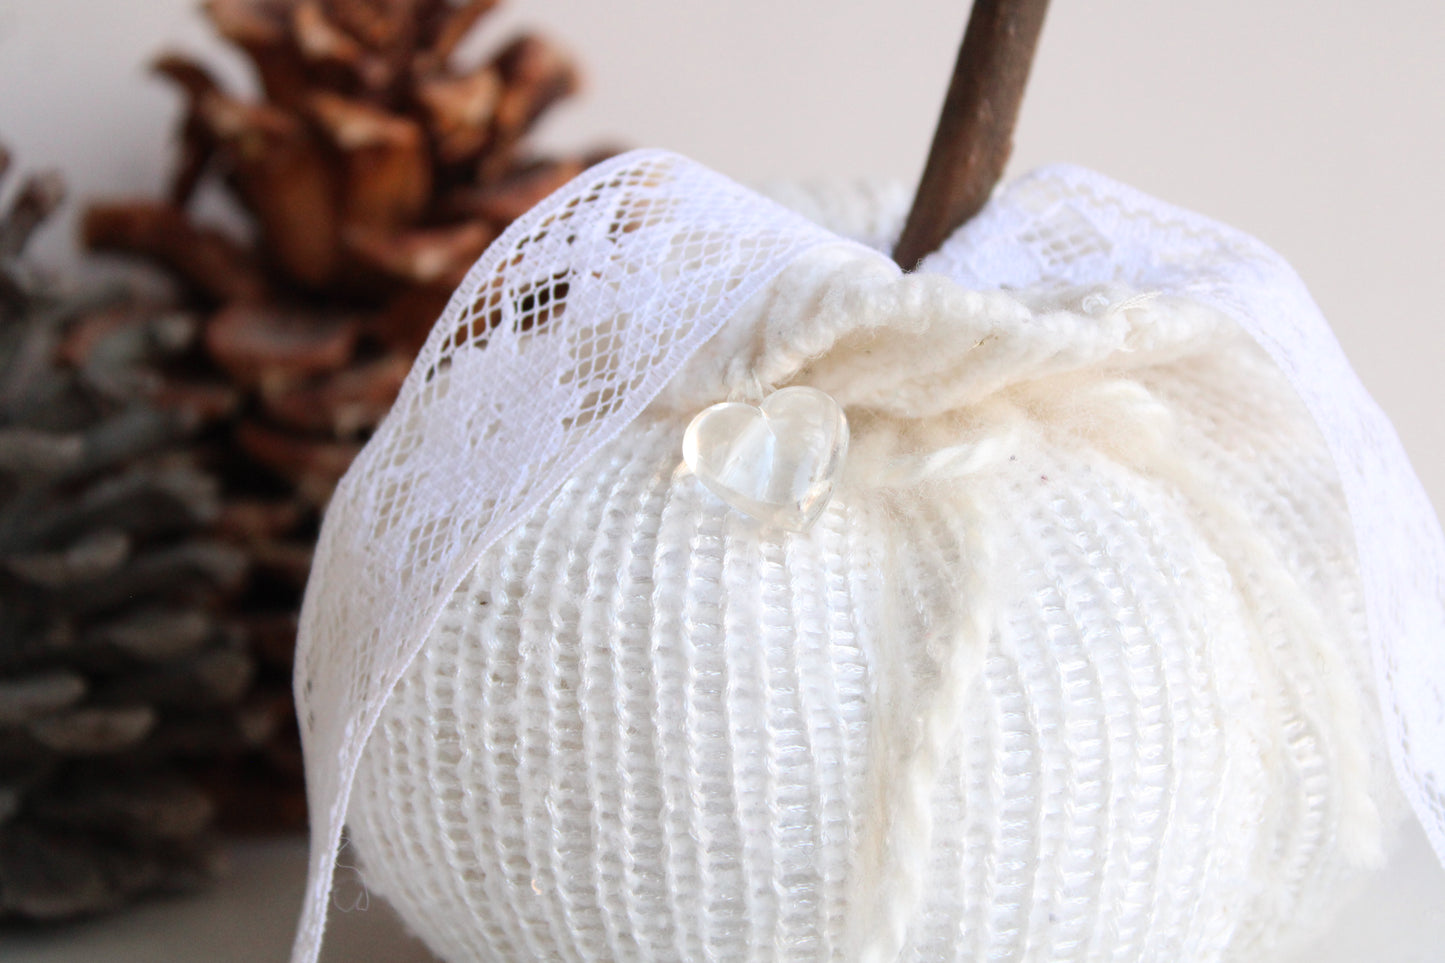 Creamy White Knit Pumpkin PIllow Pouf with Vintage Lace And Crystal Heart